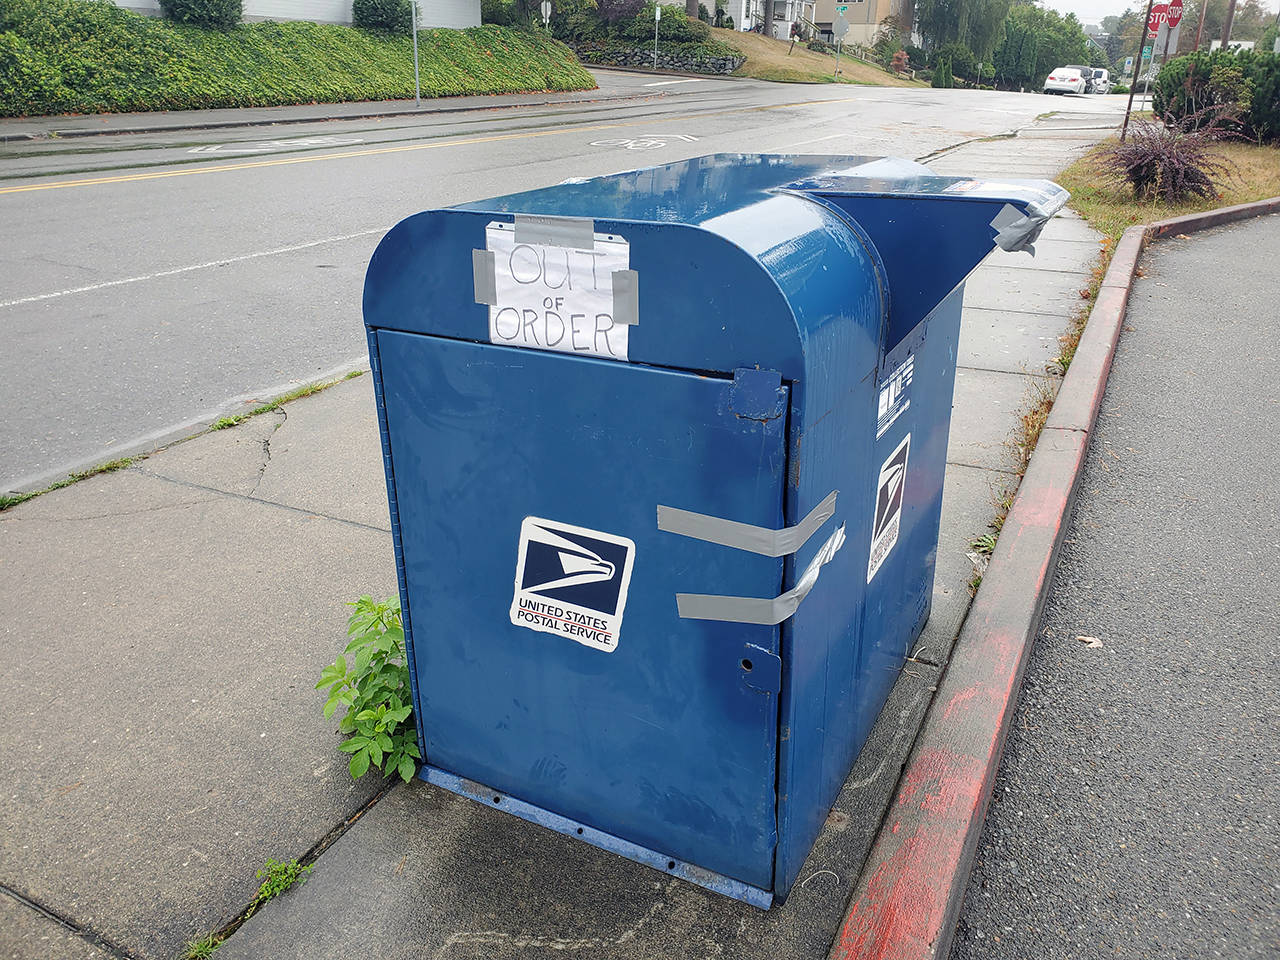 Vandalism results in removal of two Everett mail boxes | HeraldNet.com